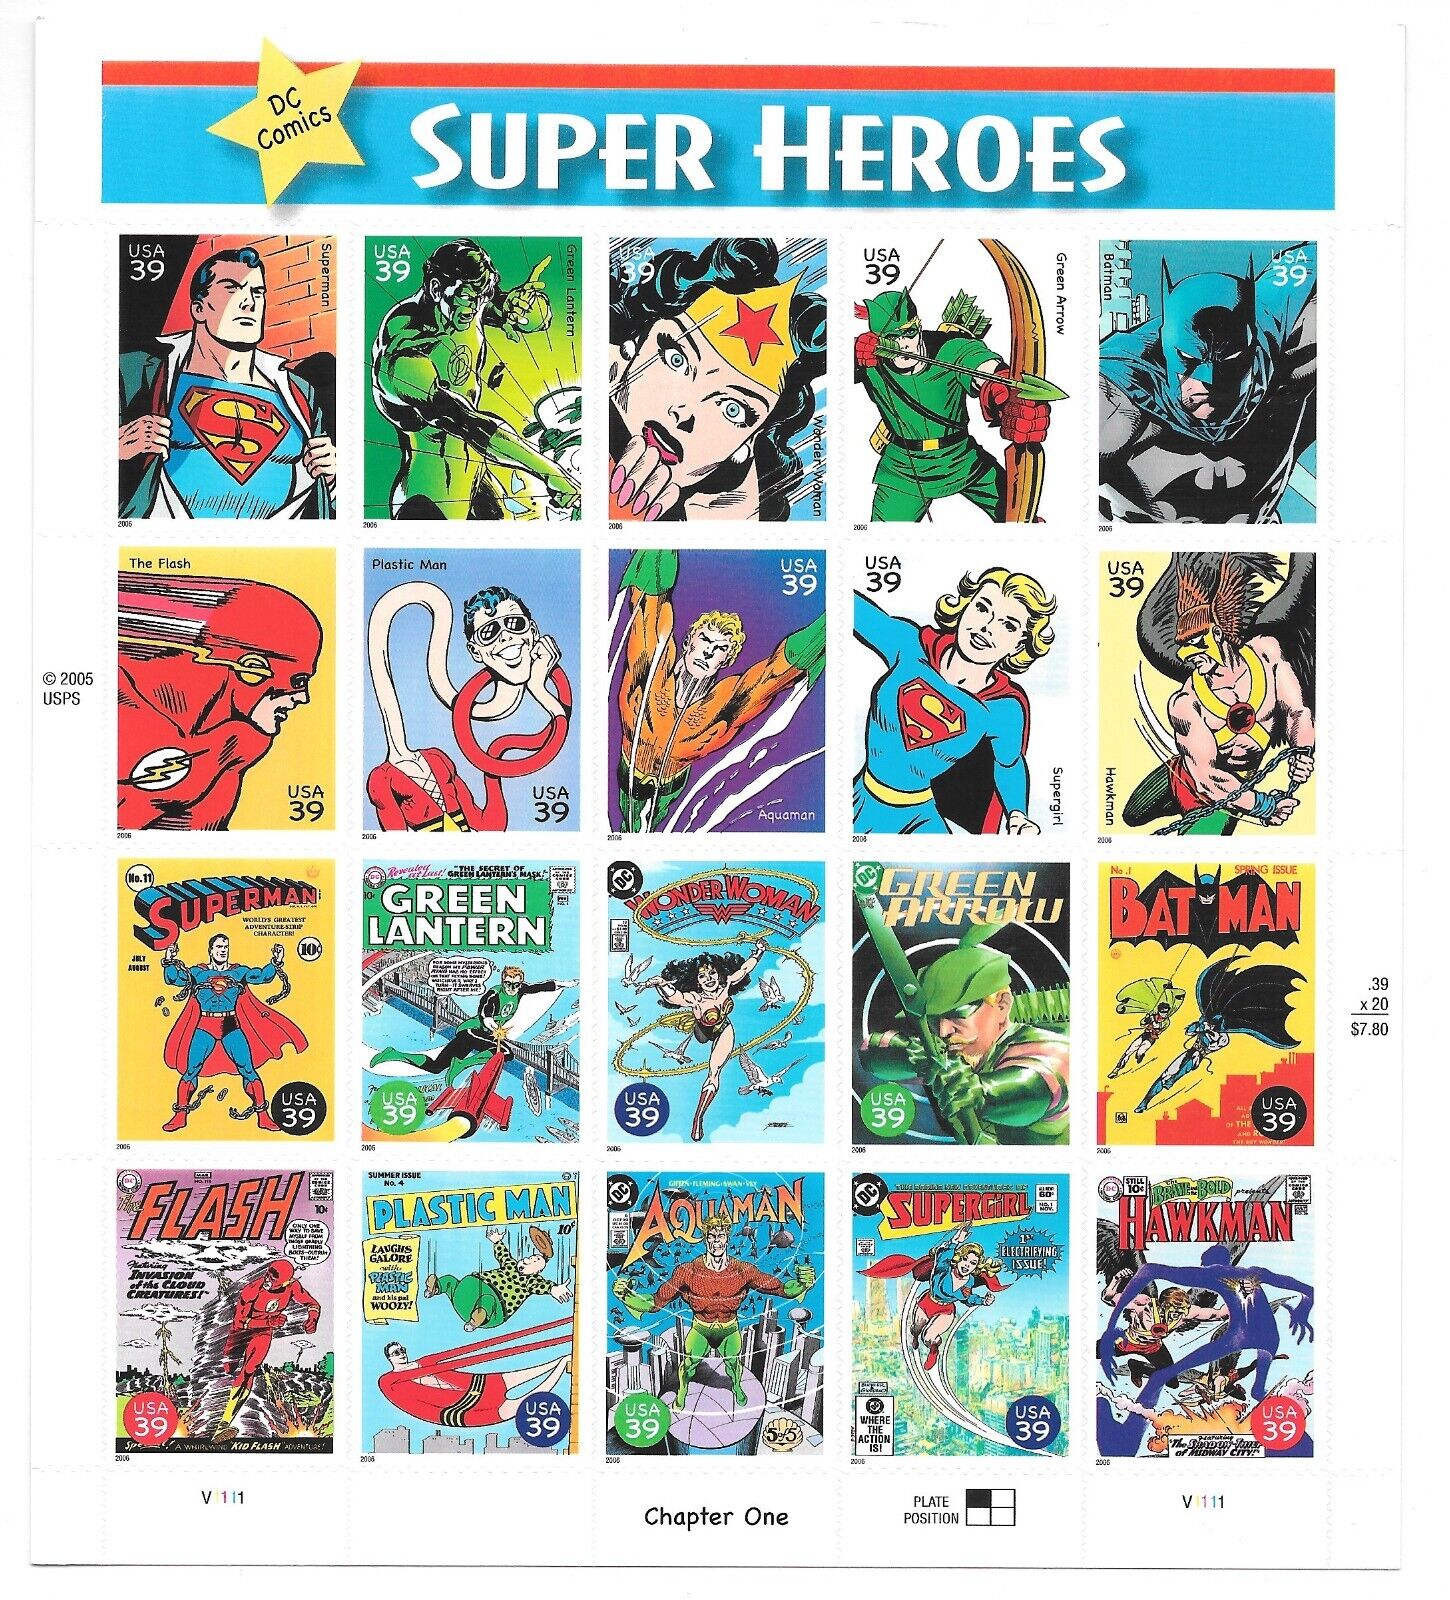 2005 DC Comics Super Heroes Stamp Sheet NM+ Condition 39 Cent Stamps